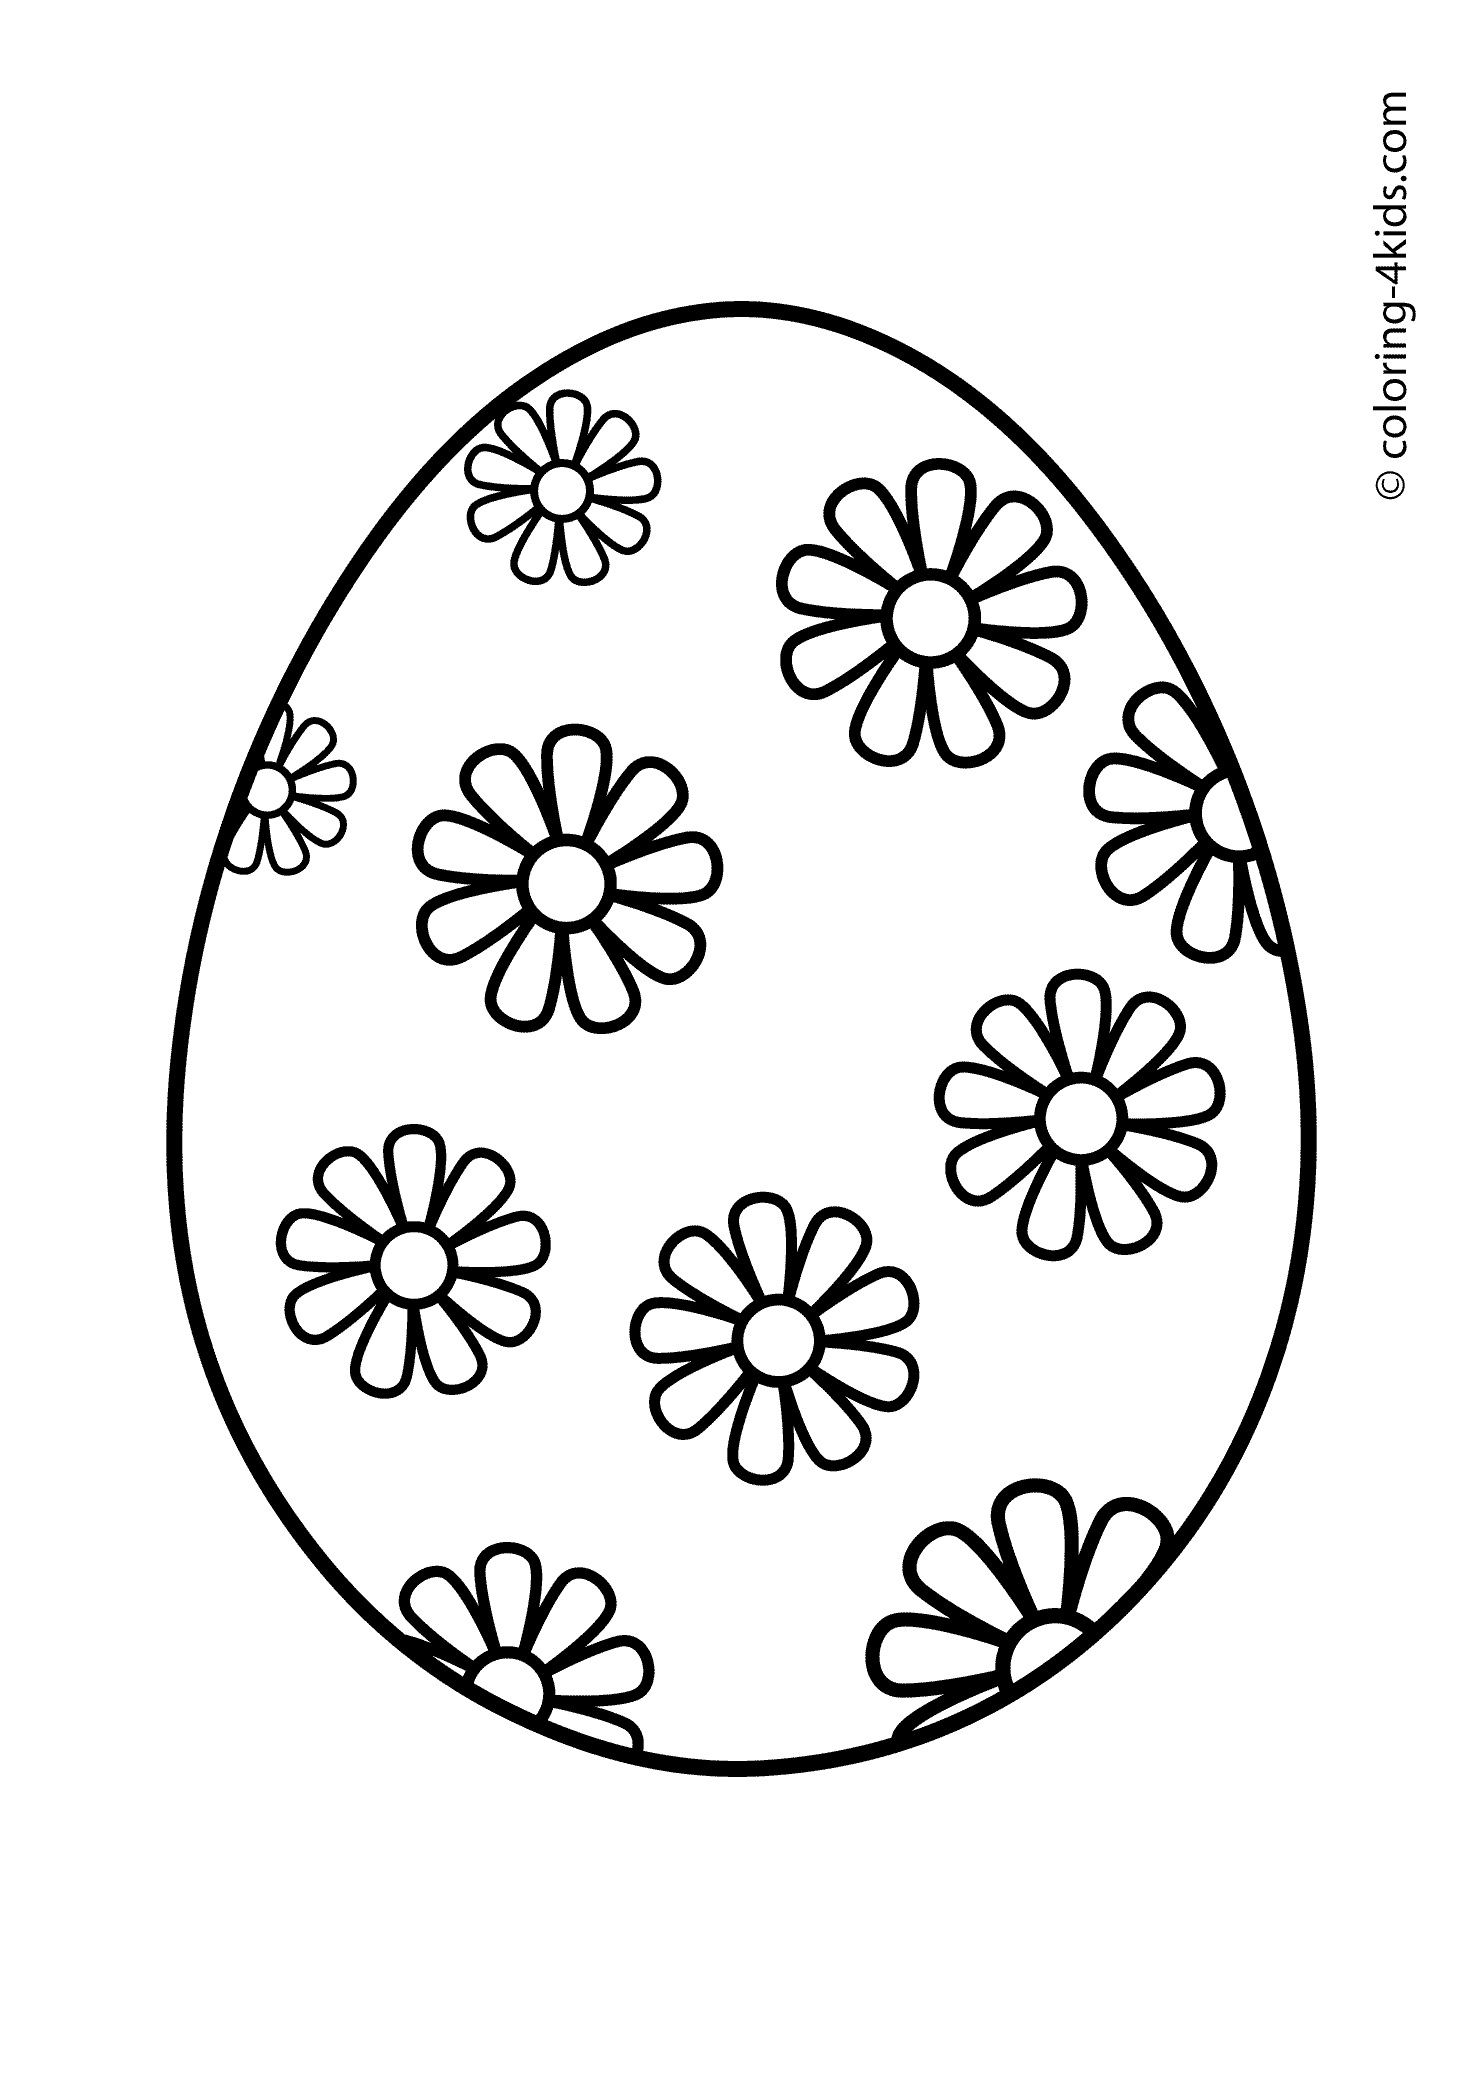 eggs coloring page free printable easter egg coloring pages for kids eggs coloring page 